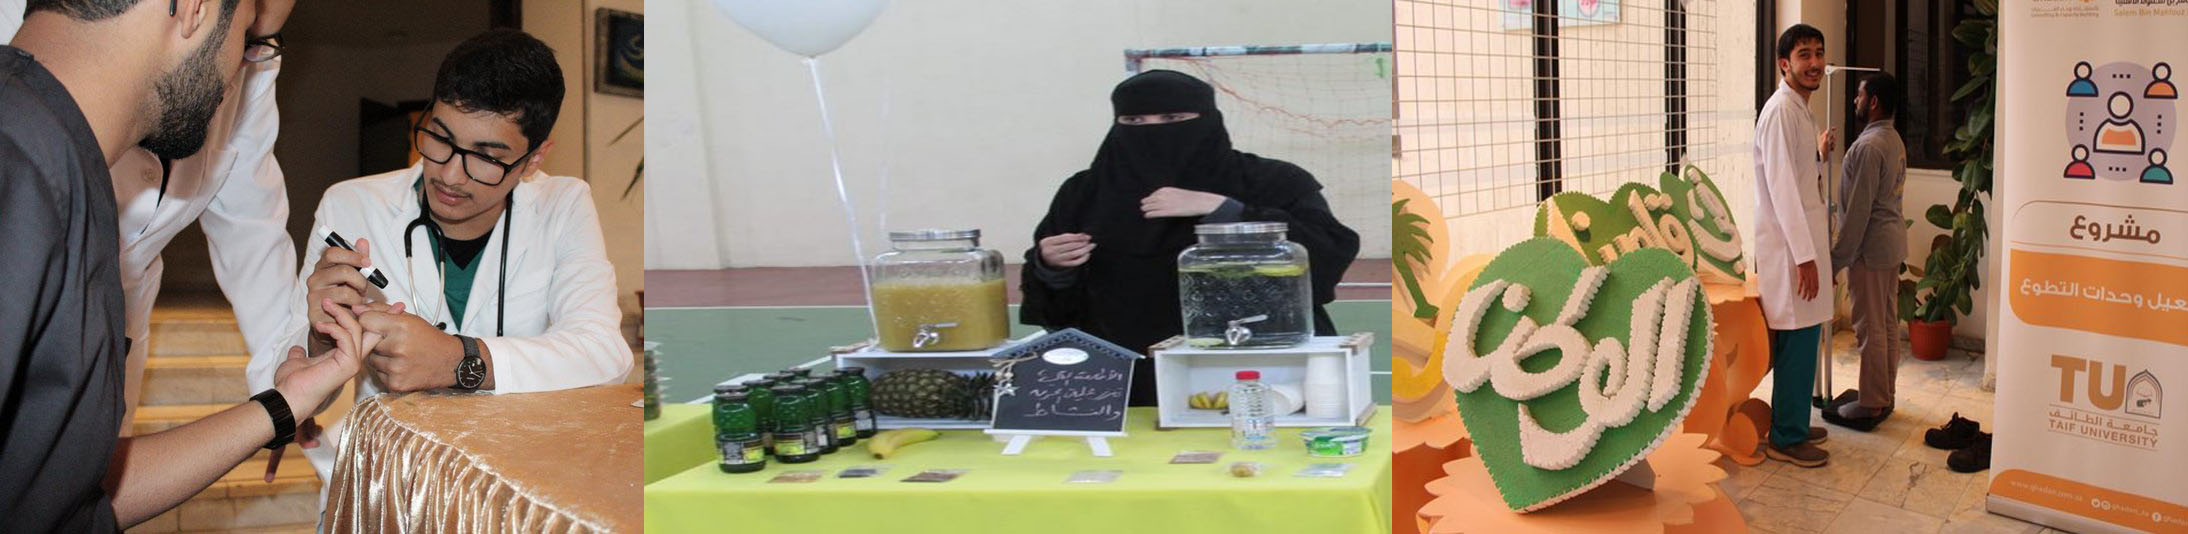 College of Medicine participates in the International Day of Obesity at Taif University 